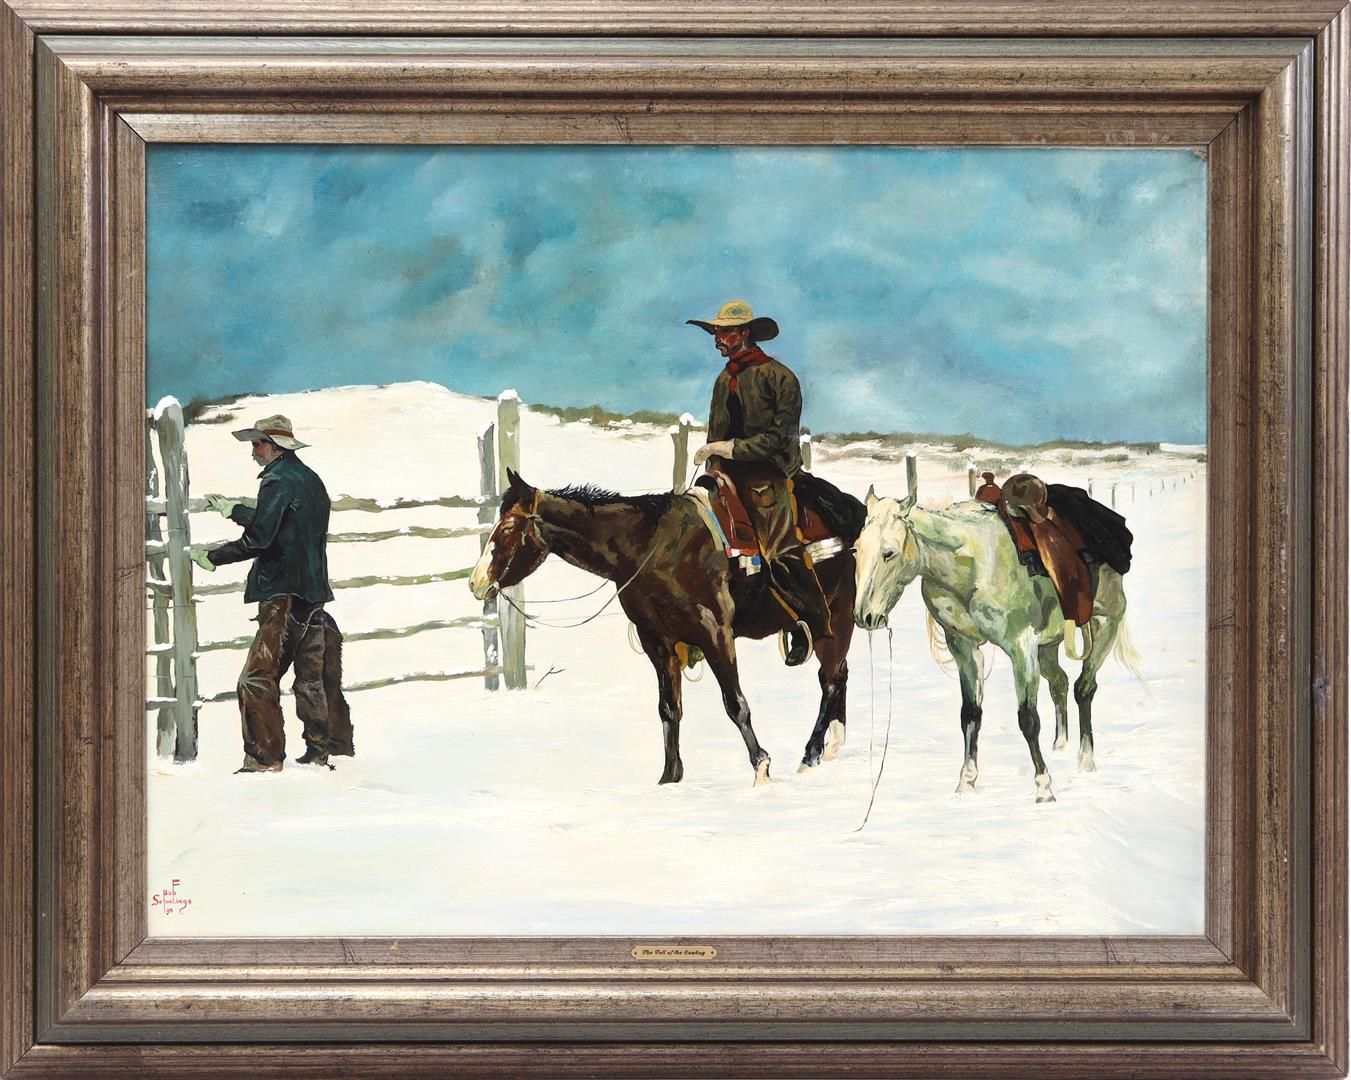 Signed Bop Scheelings Signed Bop Scheelings, cowboys in a winter landscape, canv&hellip;